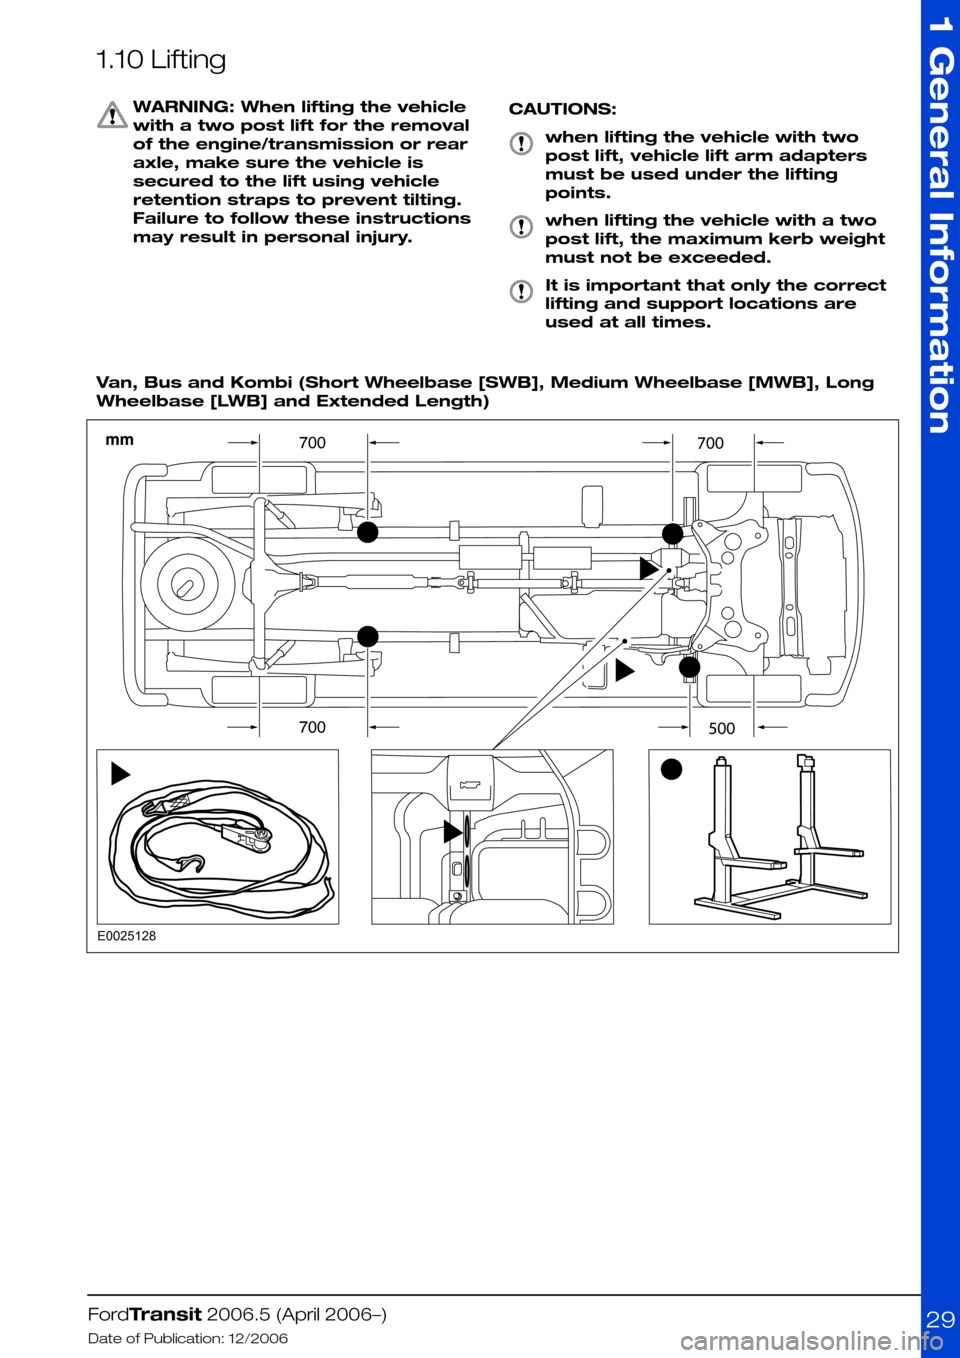 FORD TRANSIT 2006 7.G Body And Equipment Mounting Section Manual 1.10 Lifting
WARNING: When lifting the vehicle
with a two post lift for the removal
of the engine/transmission or rear
axle, make sure the vehicle is
secured to the lift using vehicle
retention straps